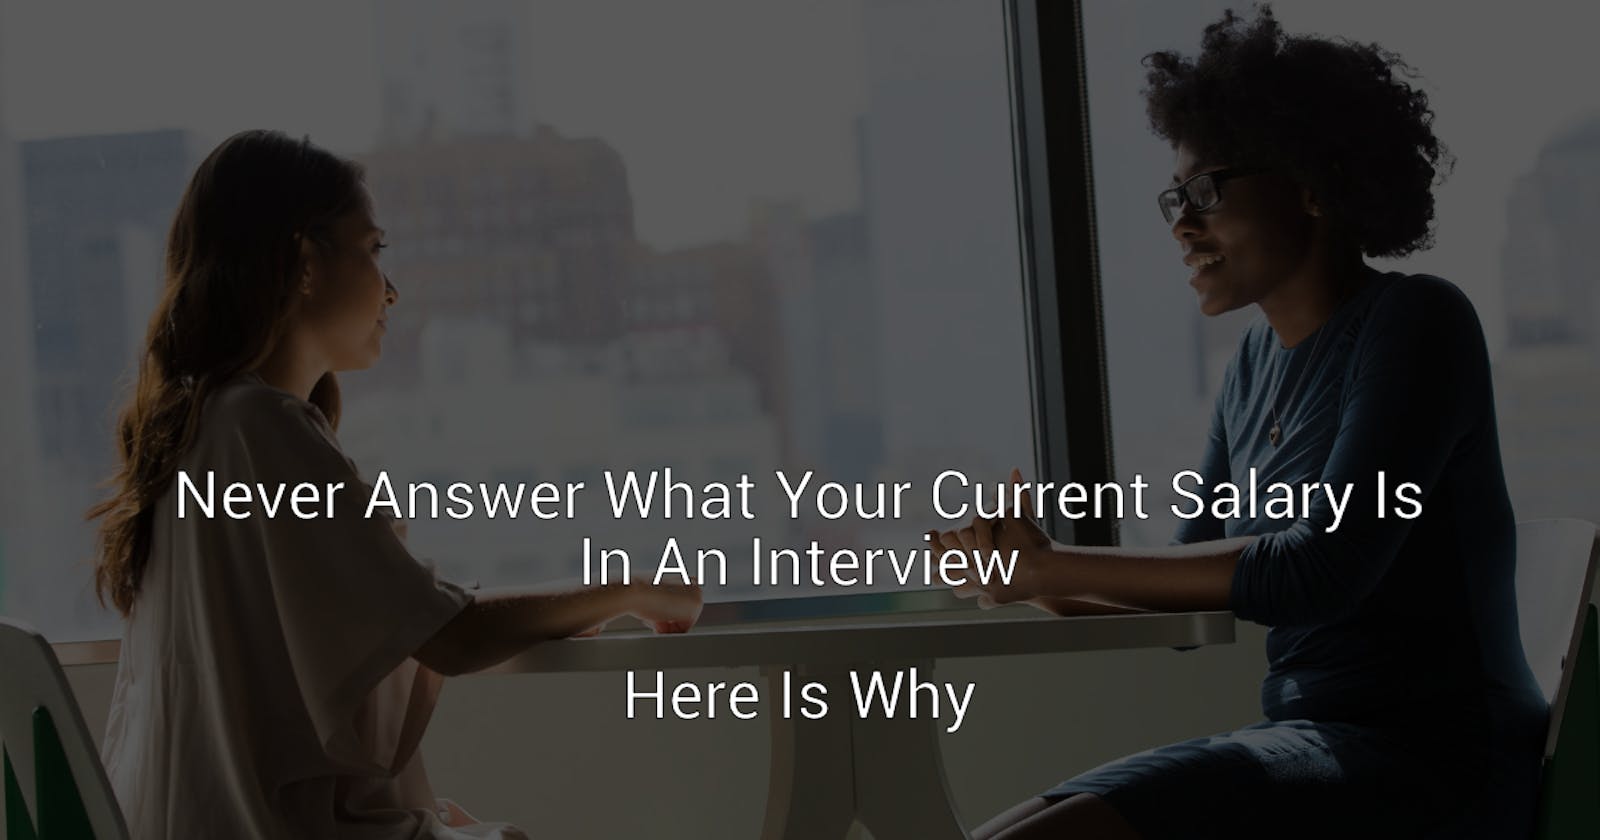 Never Answer What Your Current Salary Is In An Interview - Here Is Why